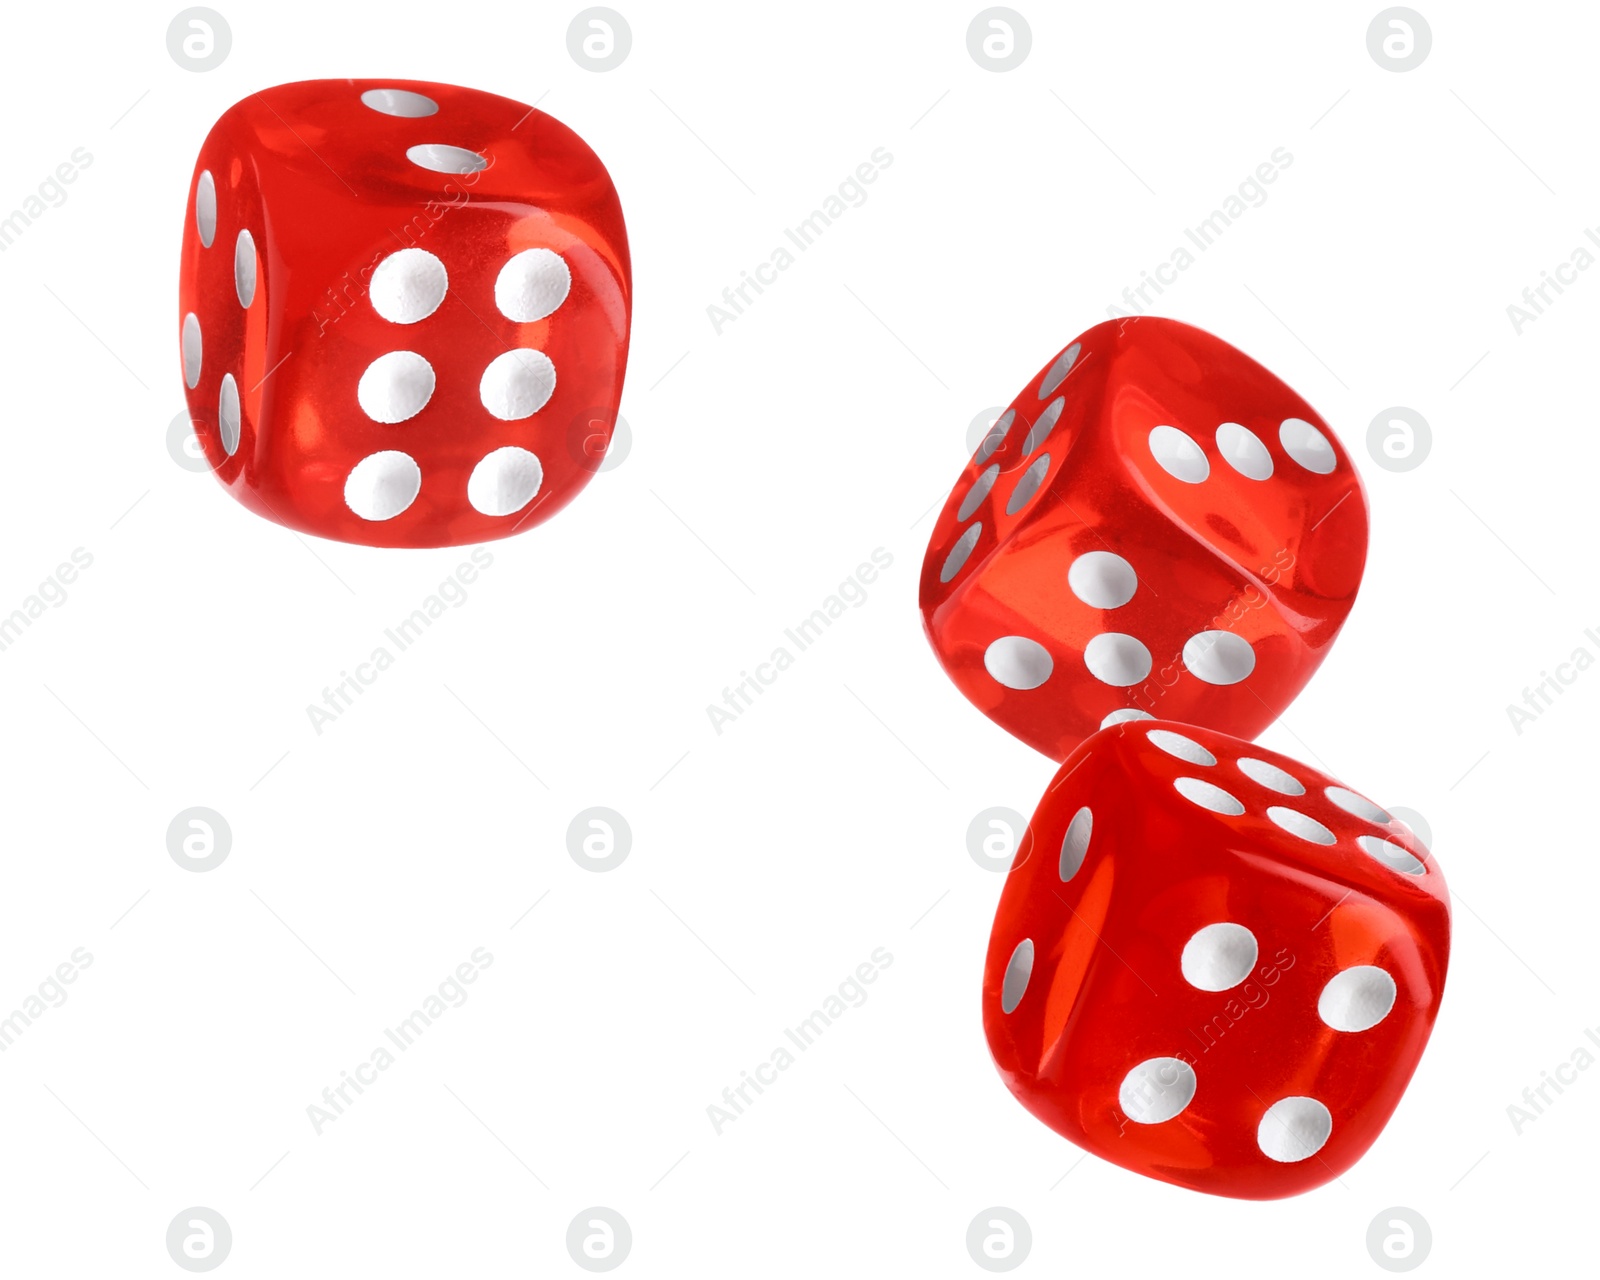 Image of Three red dice in air on white background